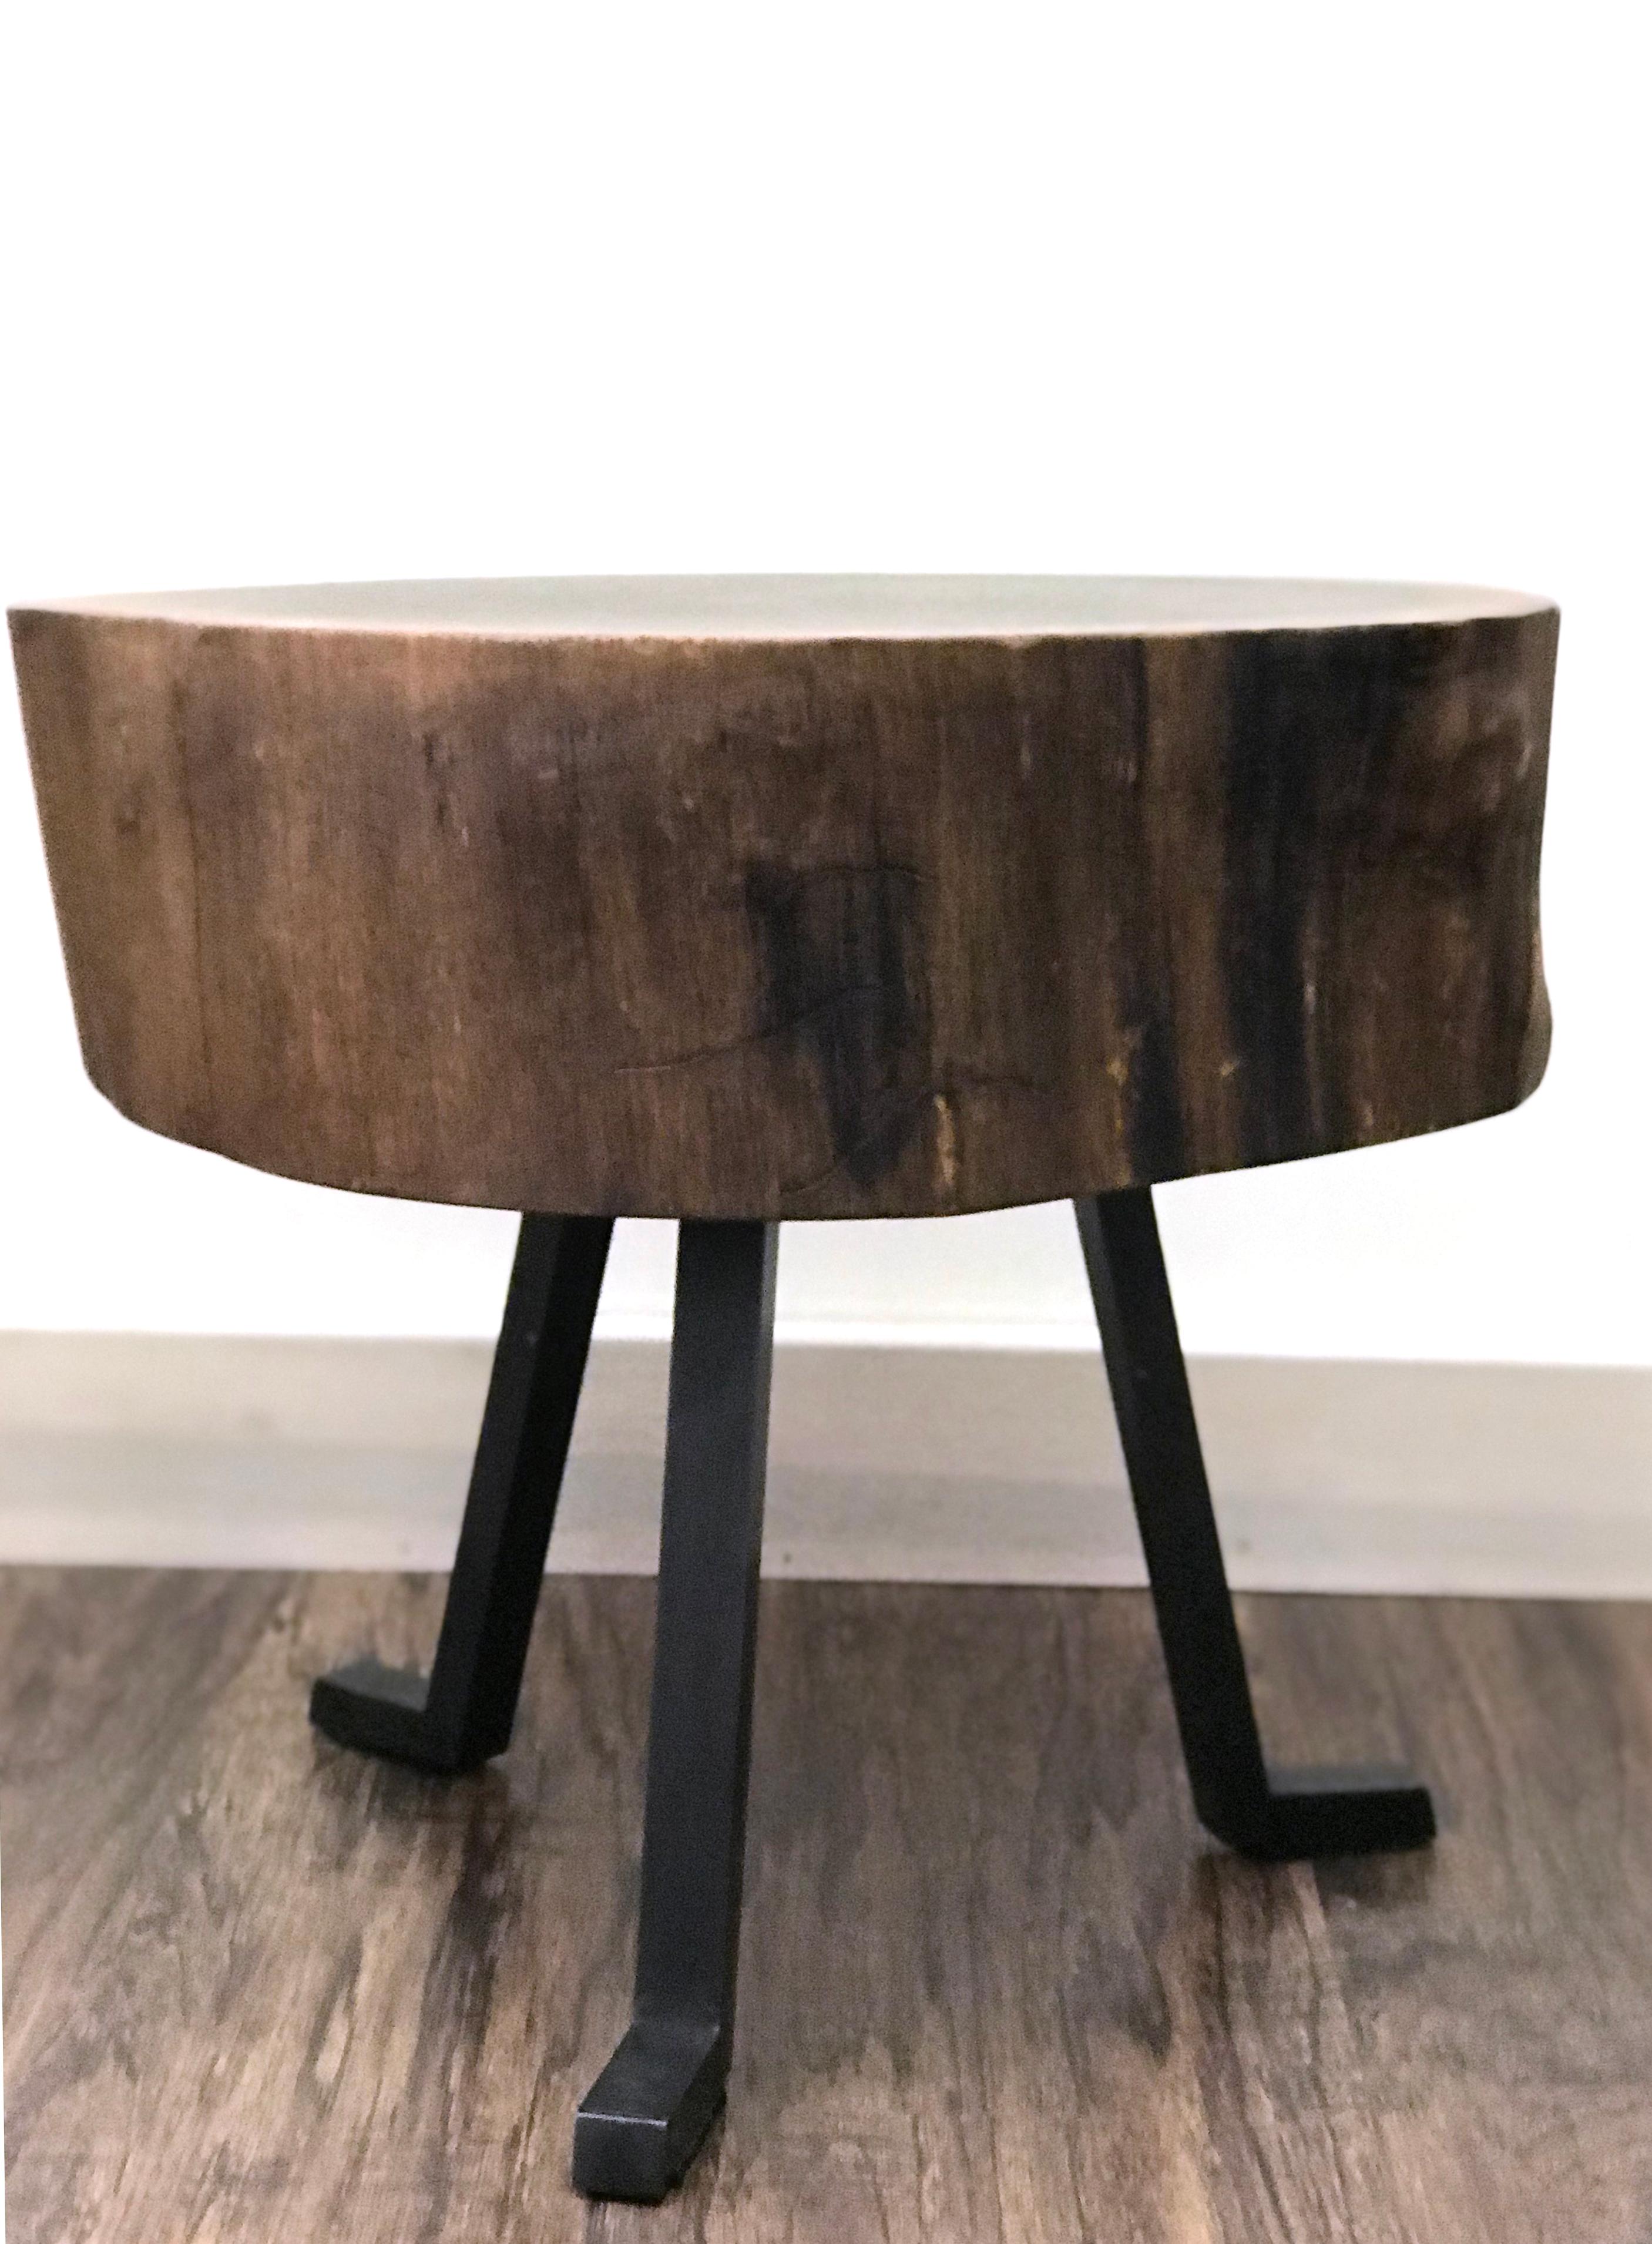 This Live Edge round side table in walnut is an occasional table, a coffee table, or a side table. We call it the Sputnik table. It is certainly irregular and that’s why you’ll love it. The three metal legs attached to live edge piece timber evoke